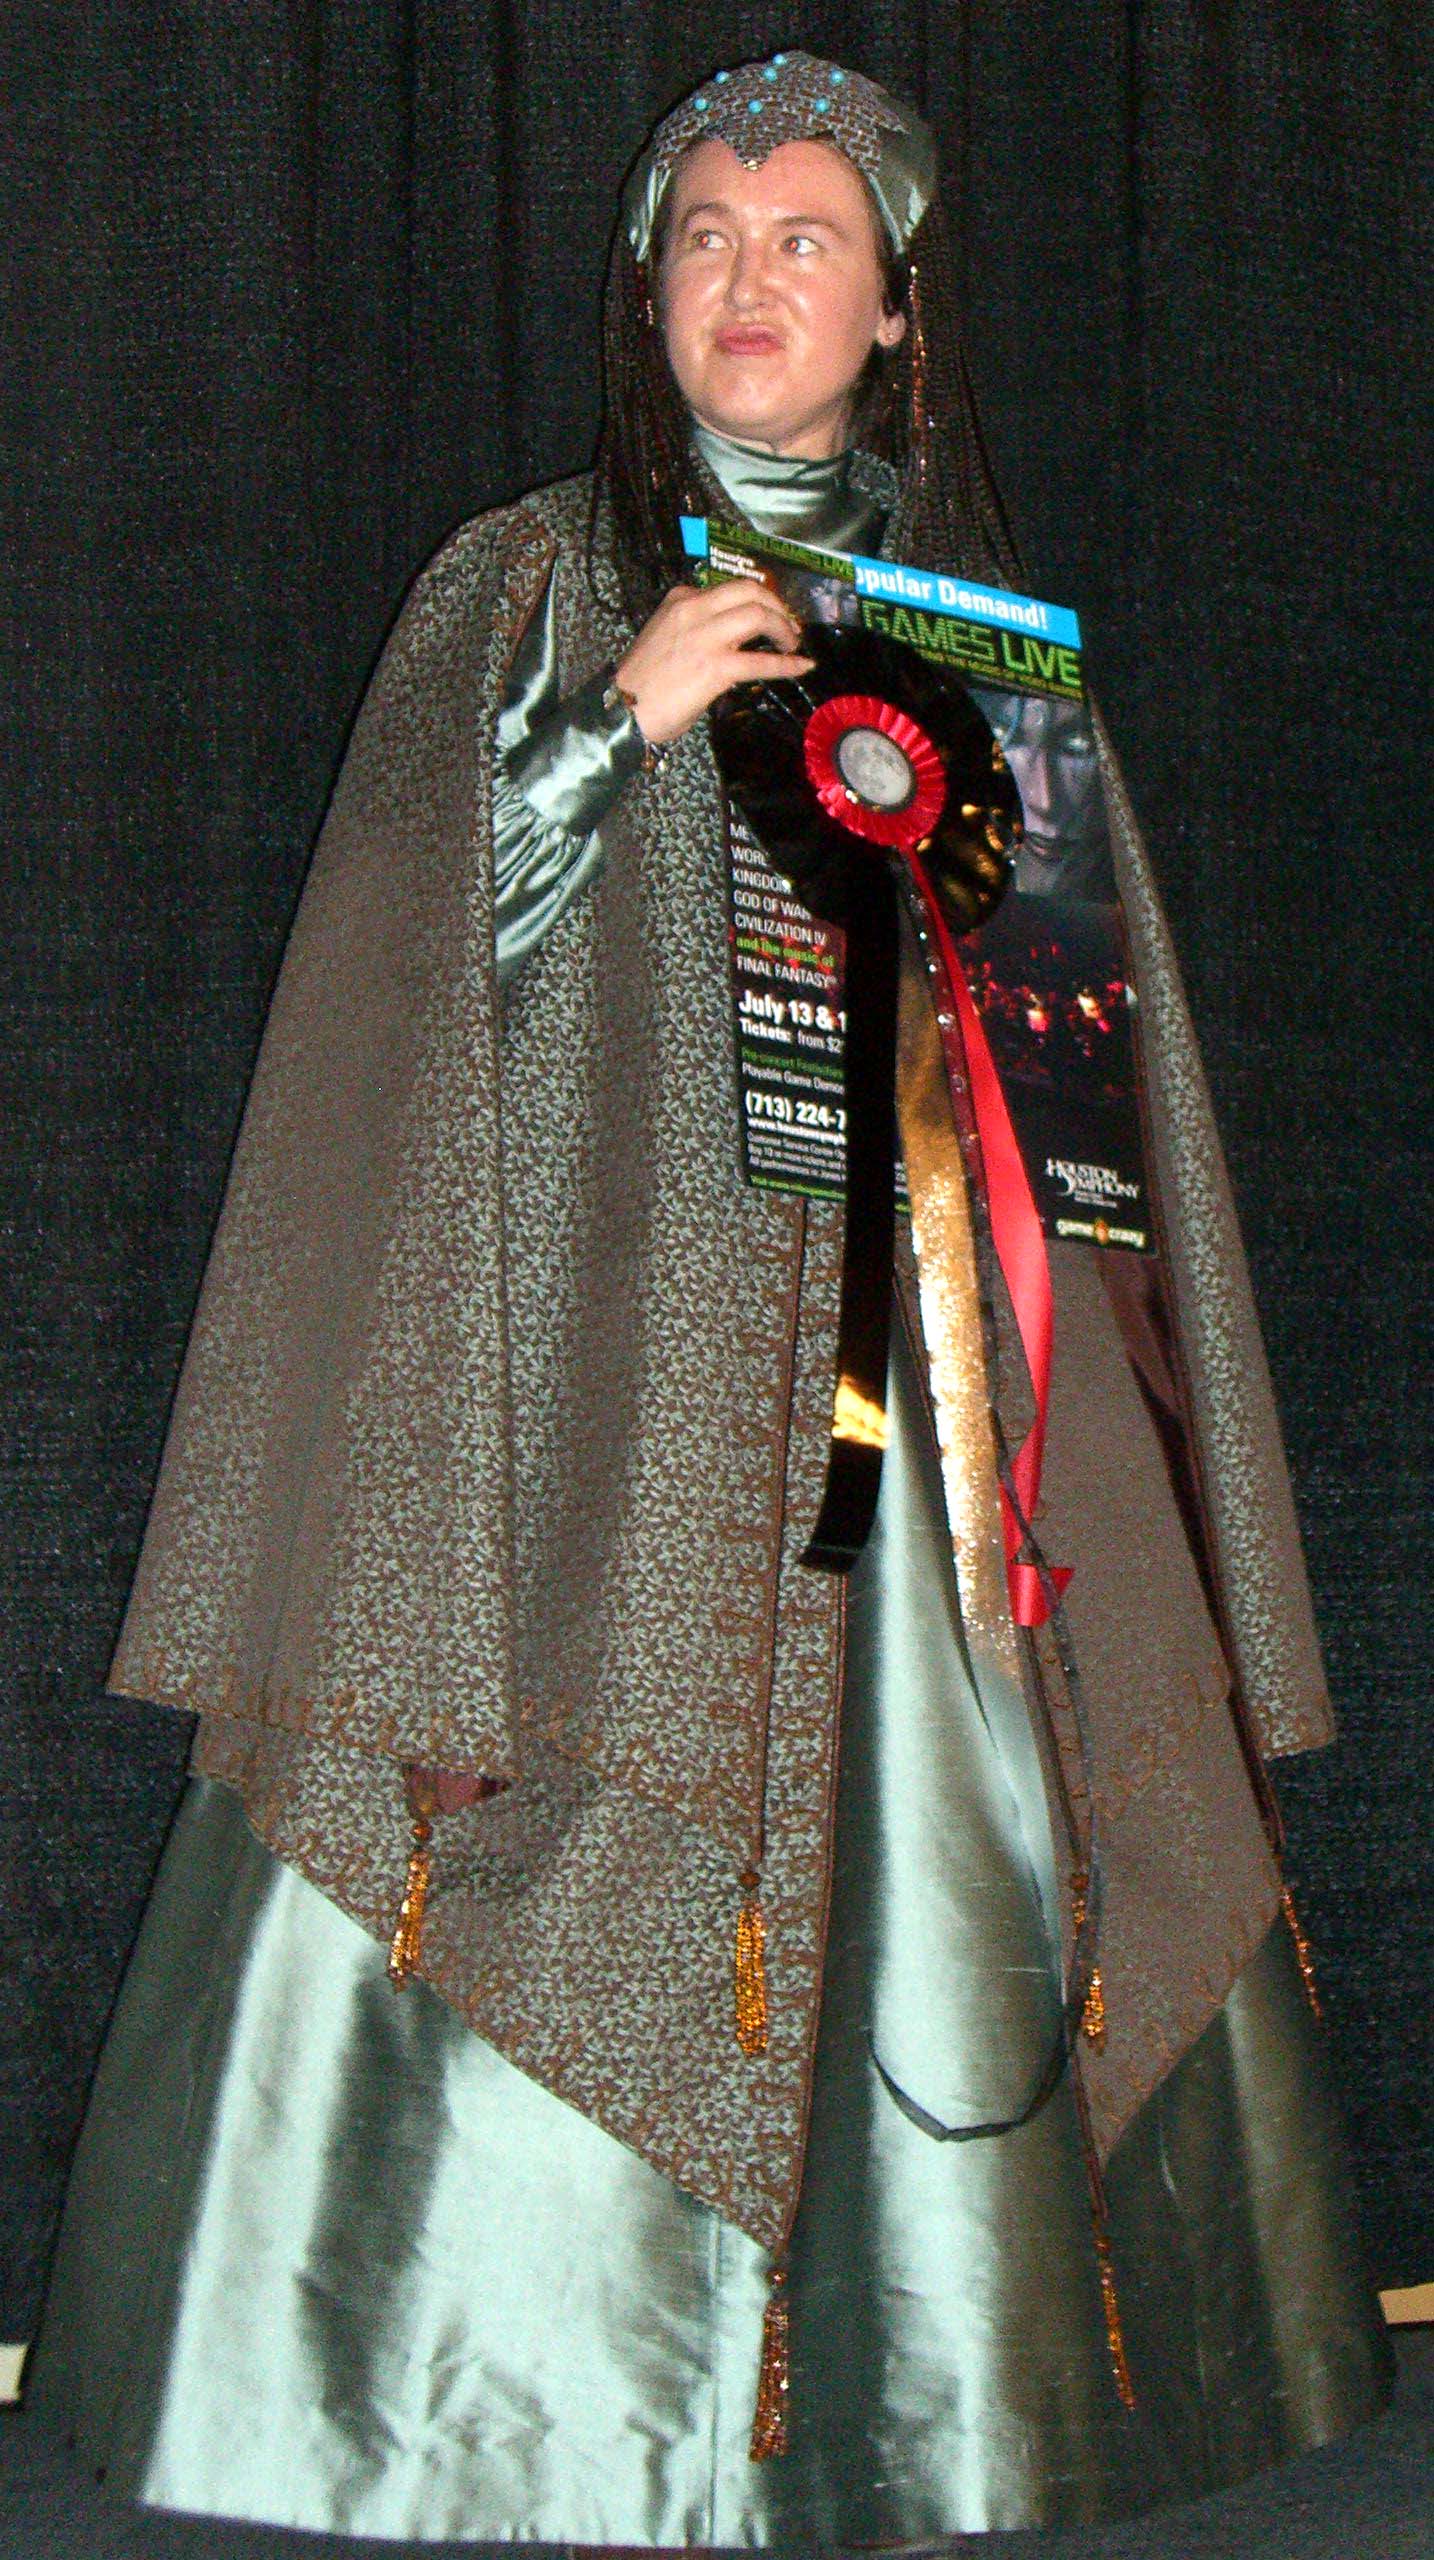 A Padme costume took one of the top 3 prizes in the masquerade